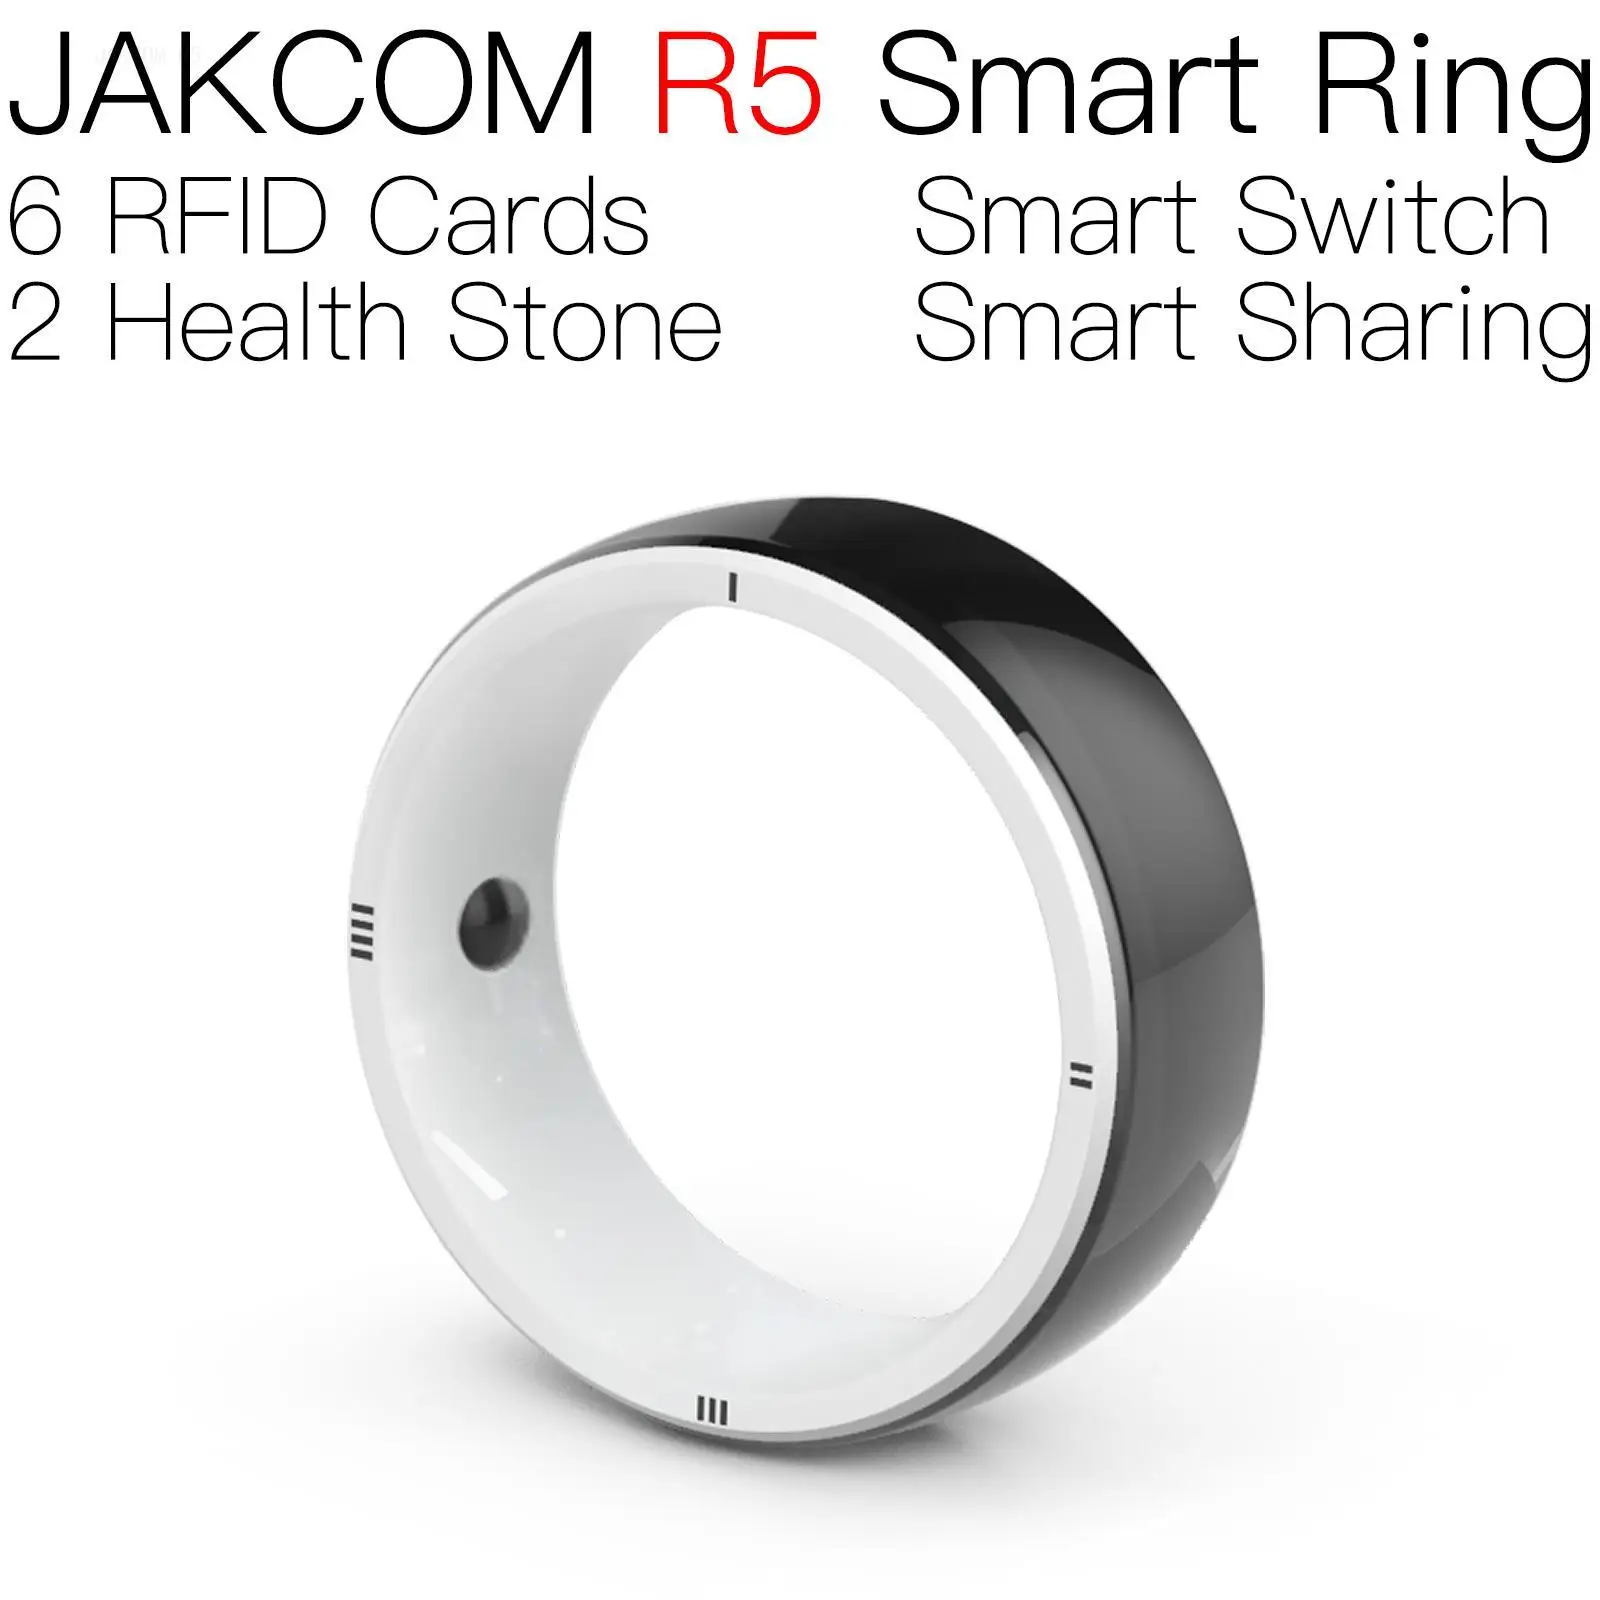 

JAKCOM R5 Smart Ring better than rfid key shielding uhf tags browser super nfc pet animal tag s50 mhz card tracking for